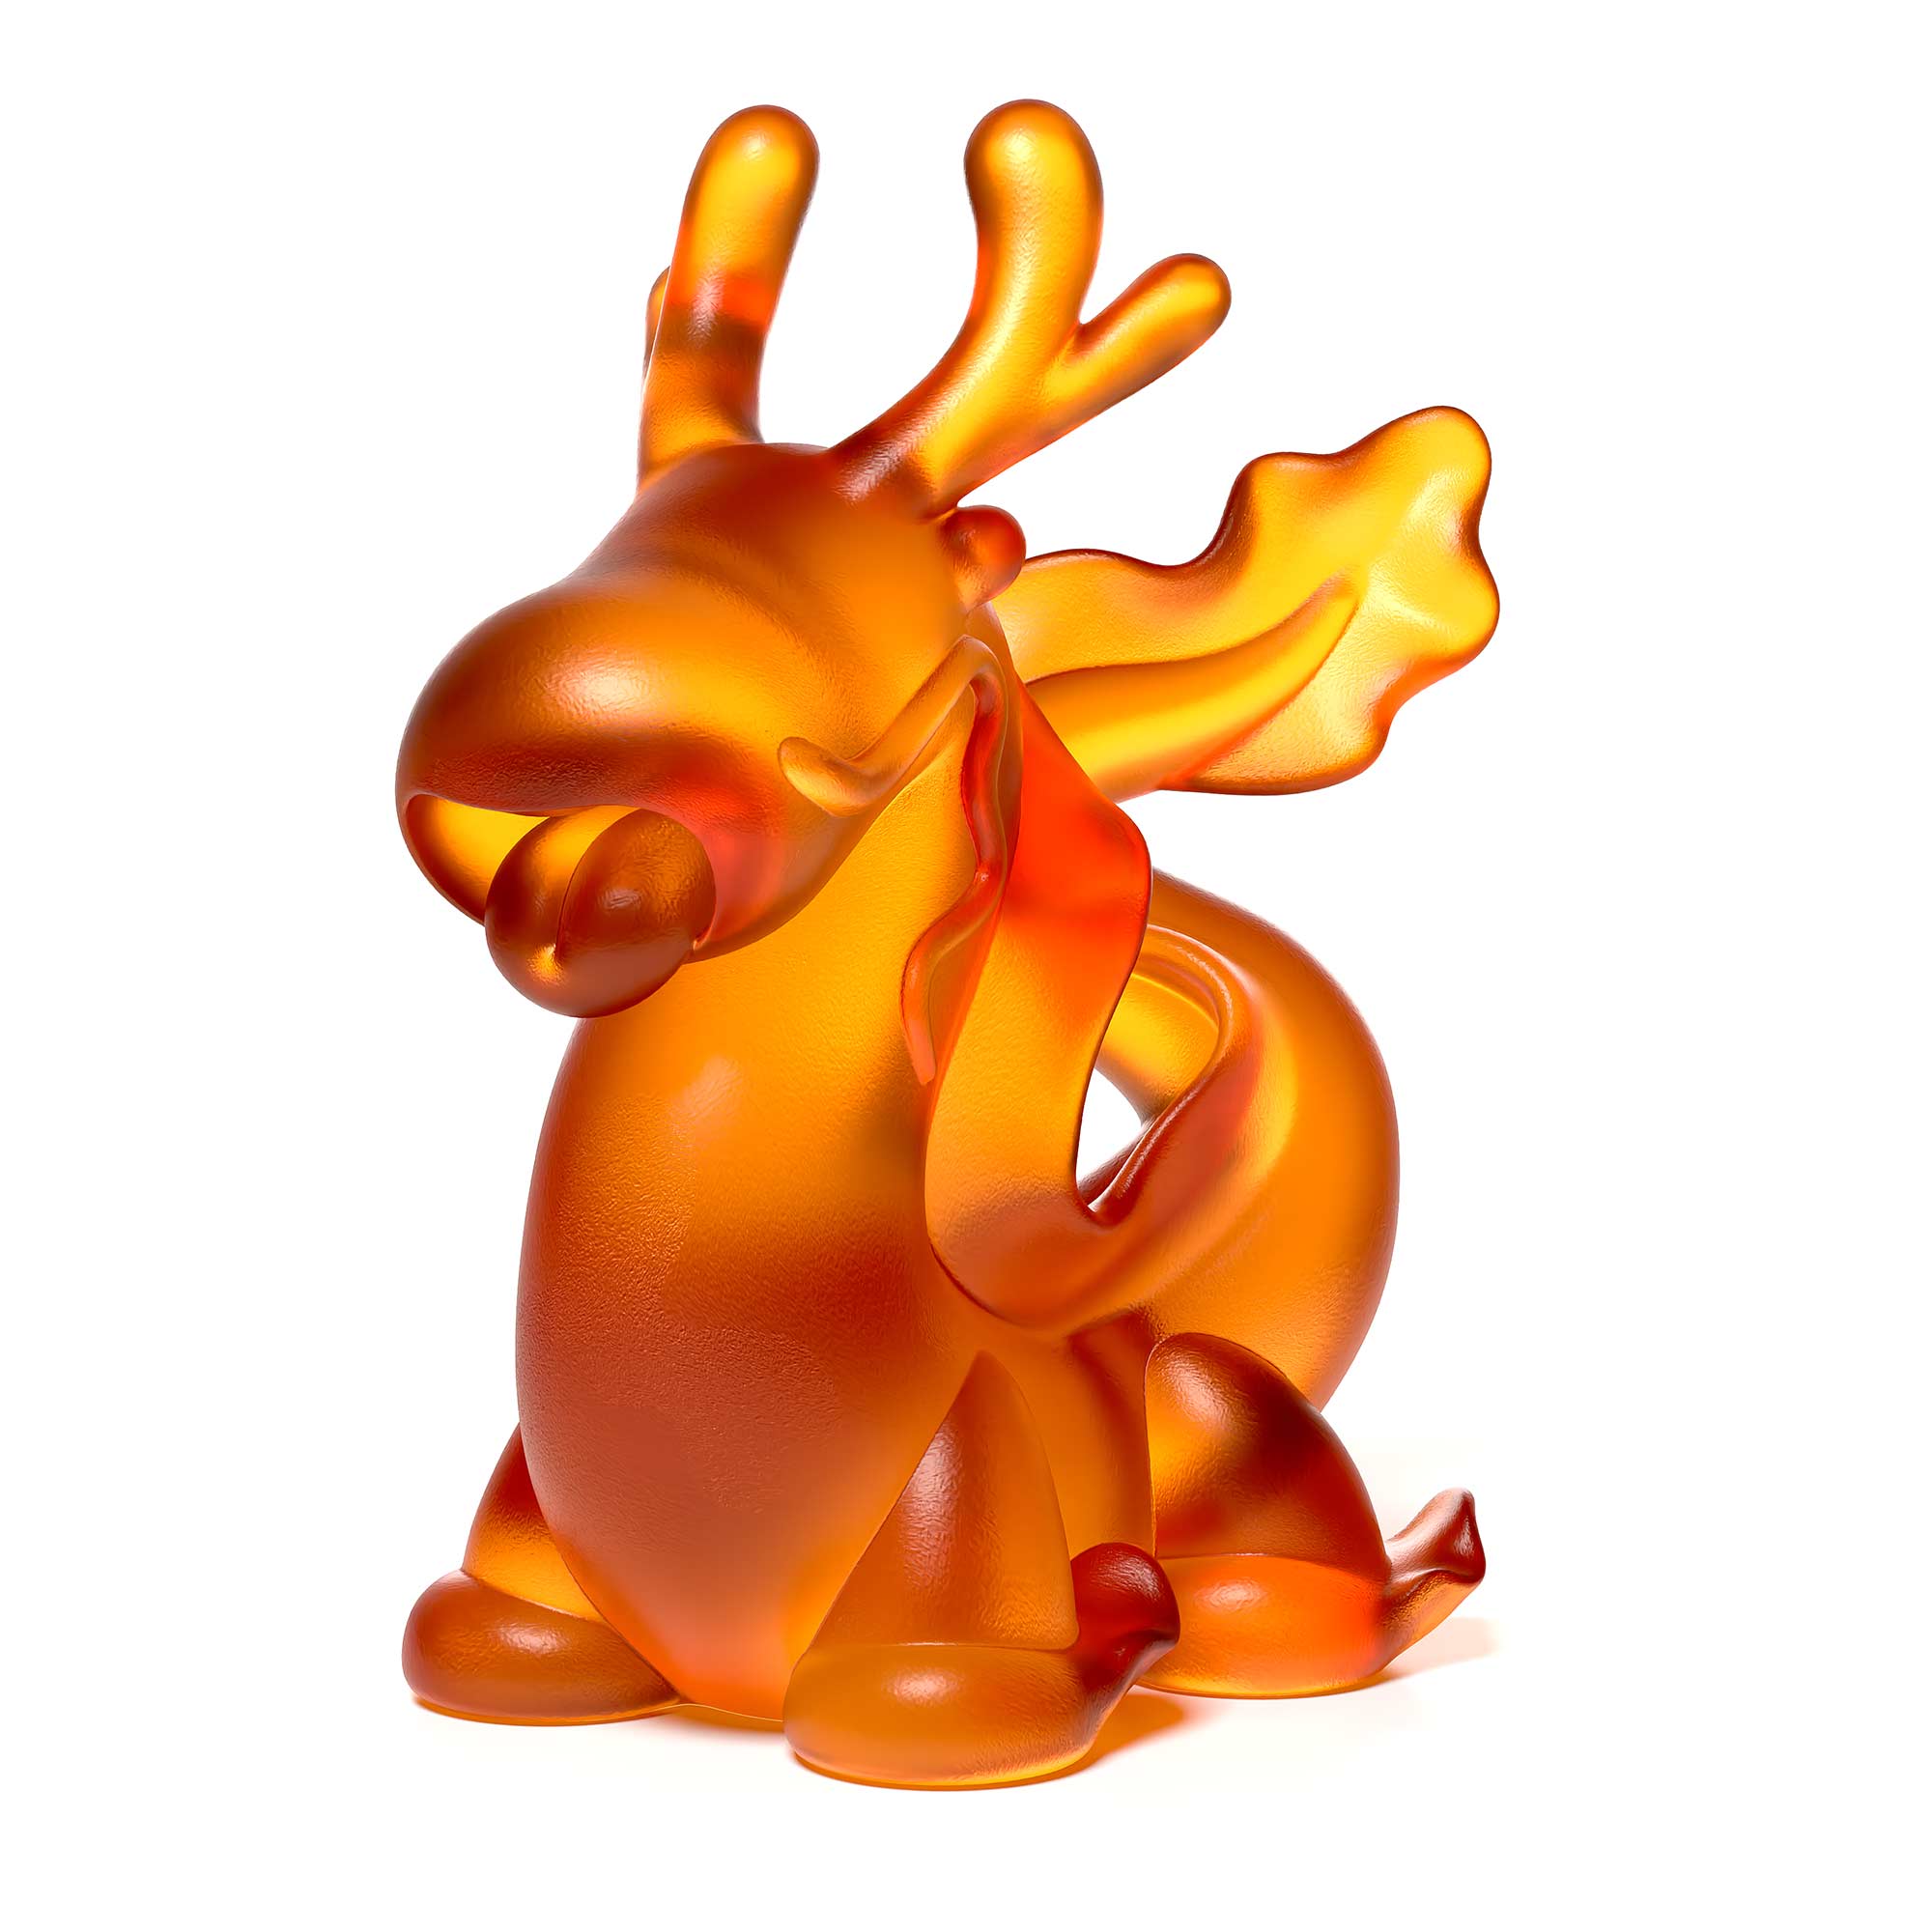 Dragon's Breath amber colour crystal sculpture the size is  16 cm height, by Ferdi B Dick,  Limited edition of 50 side view 2